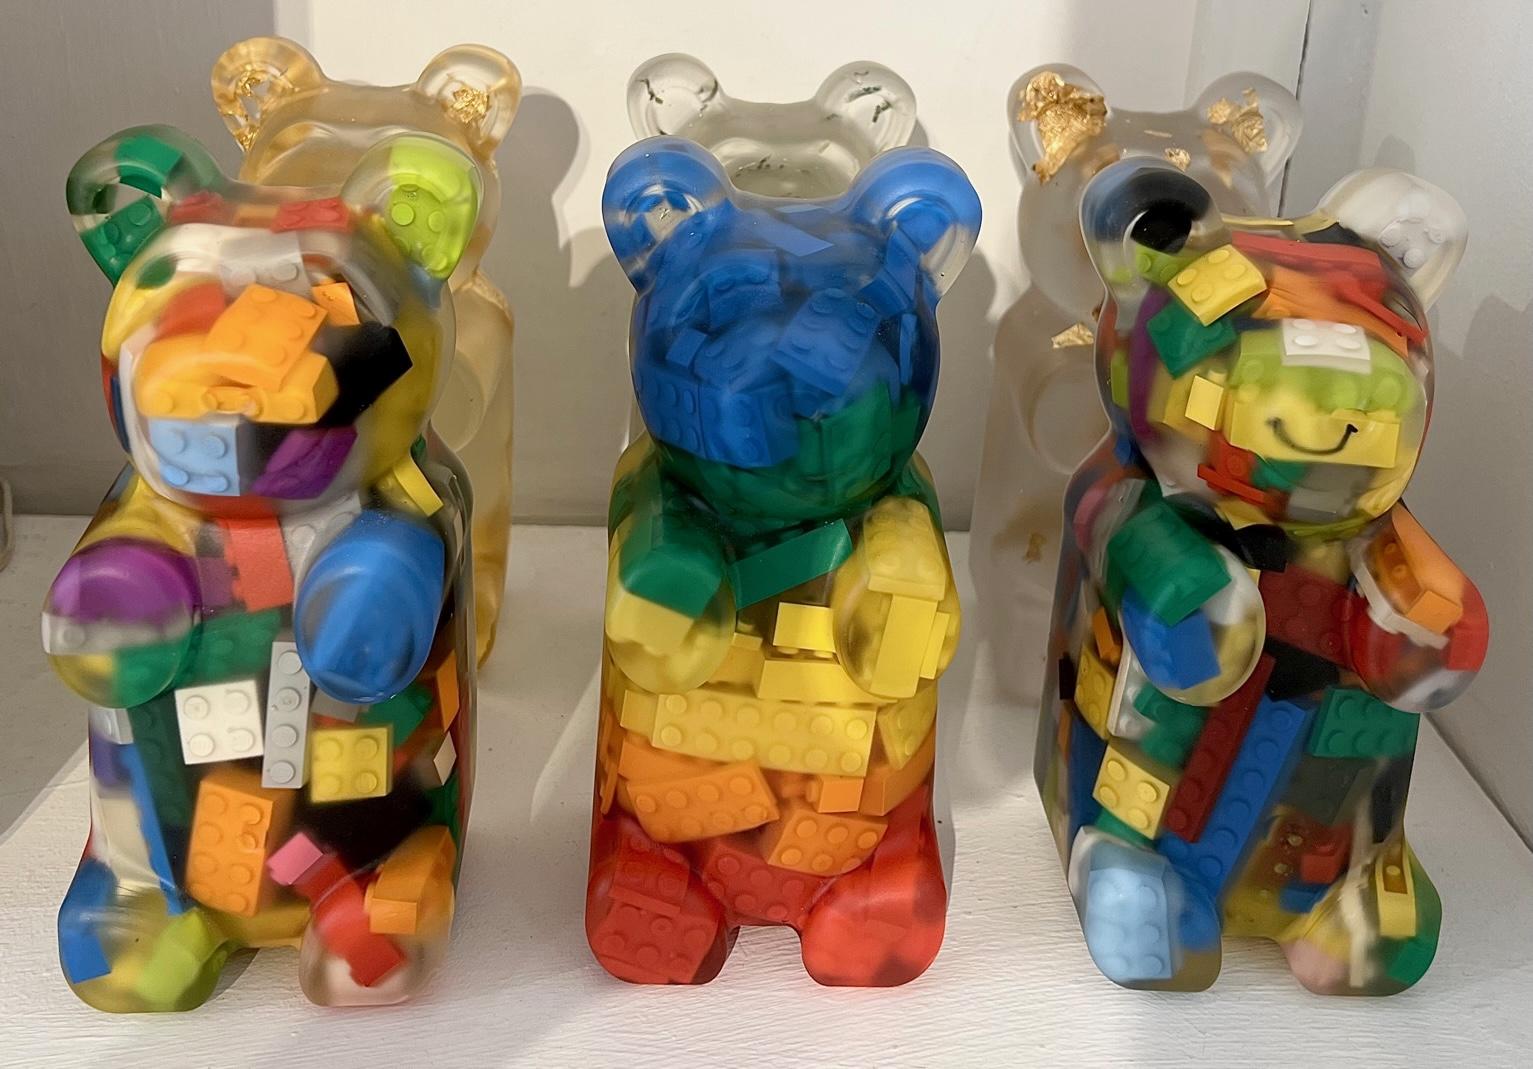 hand made resin gummy bear Approx 7.5 inch height x 3.5 inch wide x 2.5 inch depth 
Resin, filled with legos

Signed  -  Each unique inside by LA artist Sahara Novotna